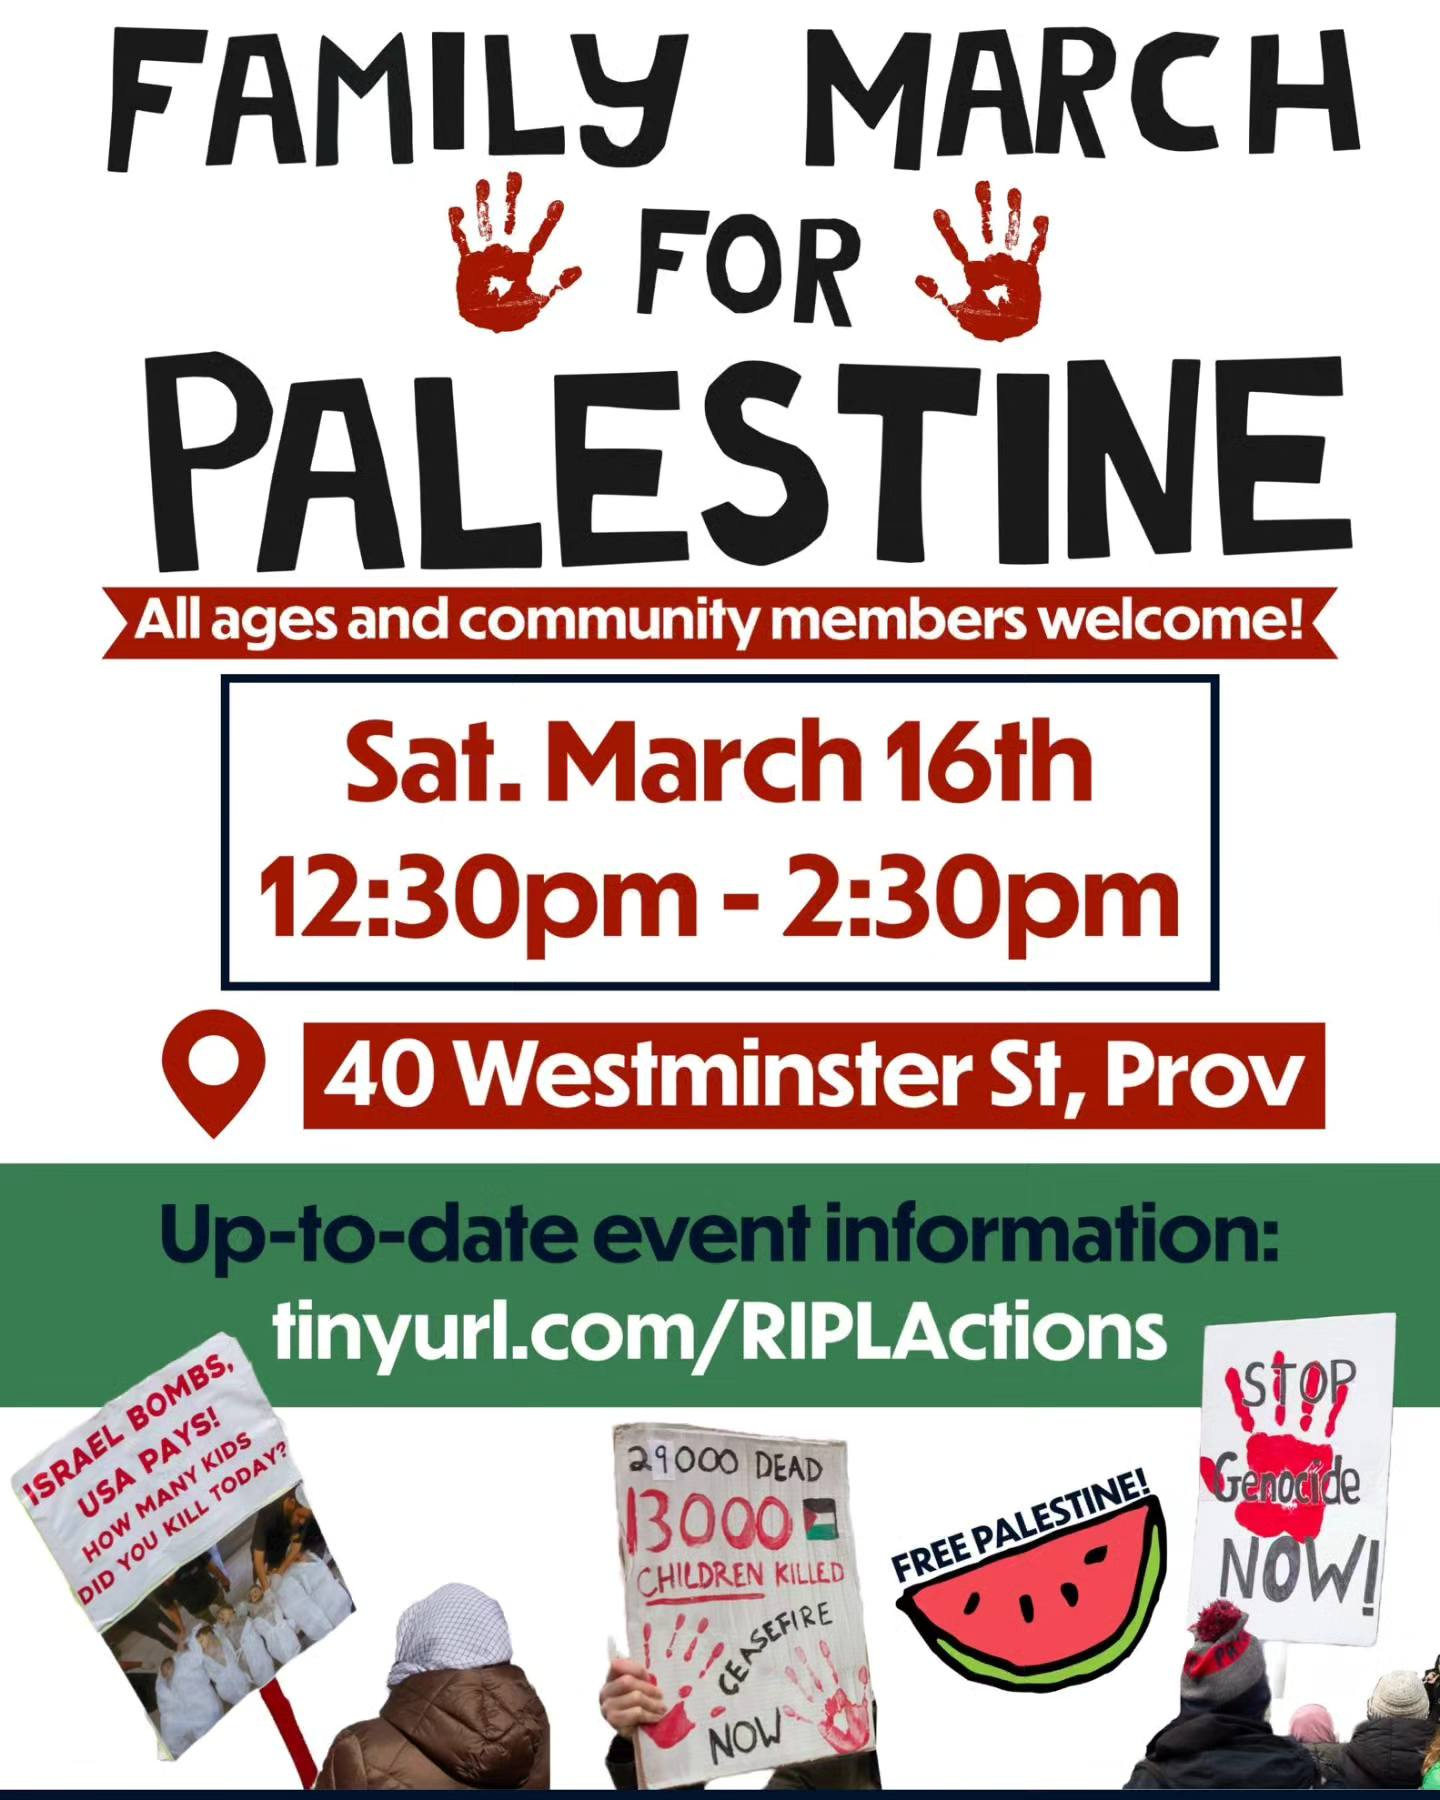 Flyer for the Family March for Palestine, showing date, time, address, and link information. Around and below are images of protestors with signs in support of Palestine, handprints in red paint, and a cartoon watermelon with text saying Free Palestine!